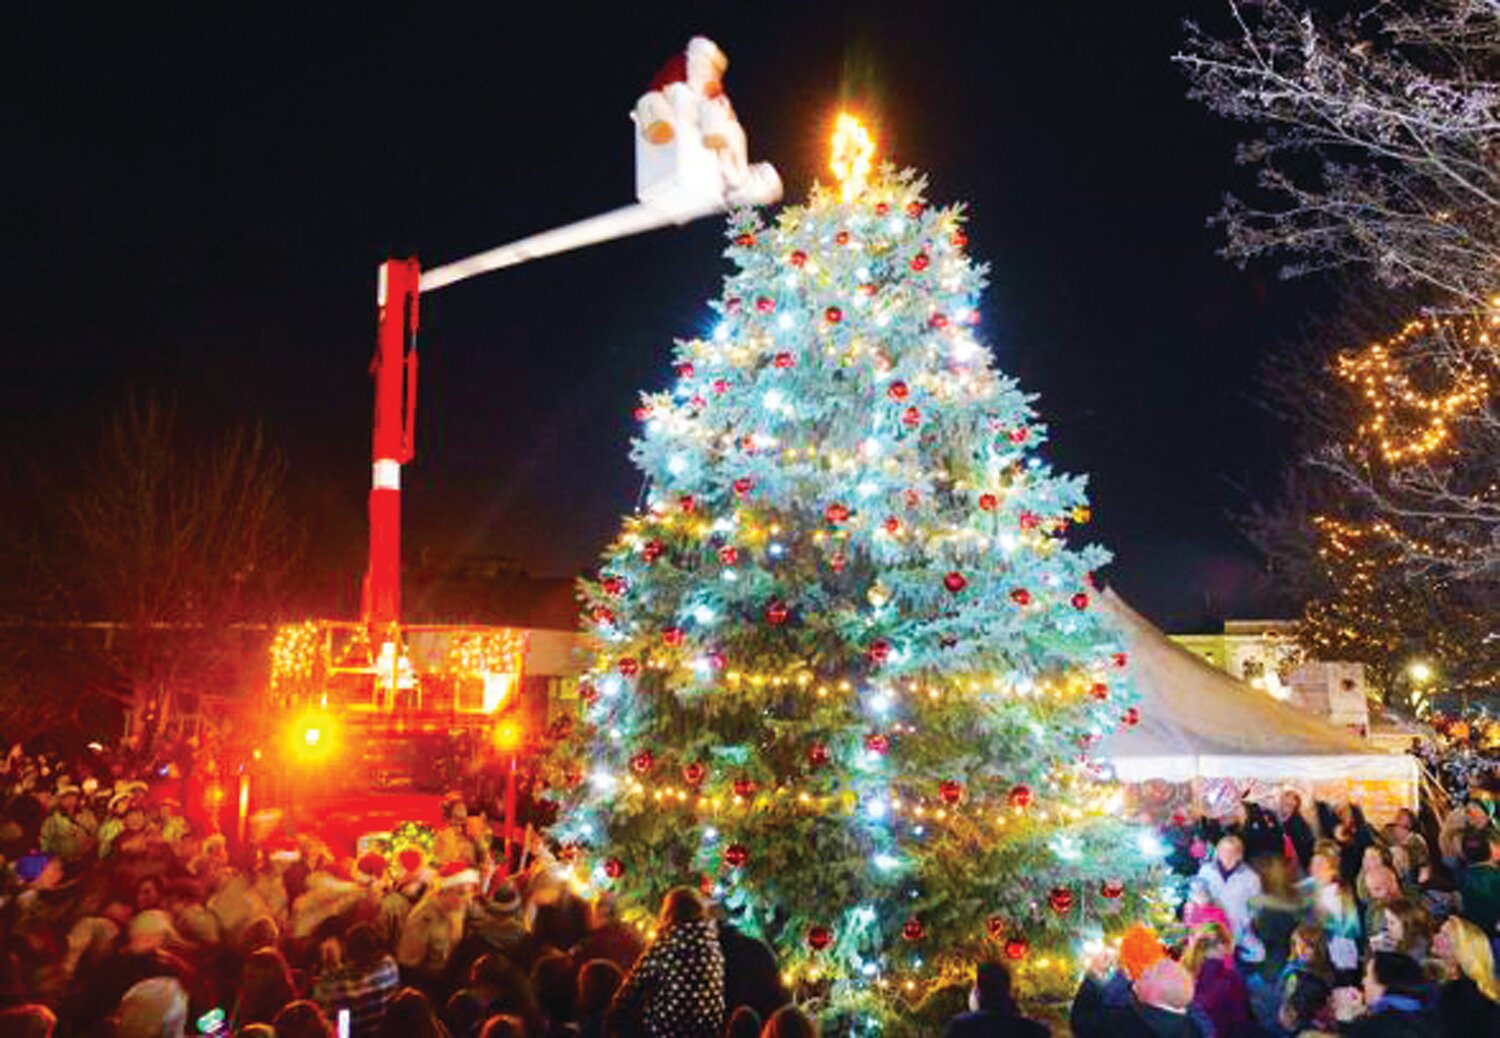 Santa Claus lights the Perkasie Borough Christmas tree, as its light gives a luster of midday to objects below.